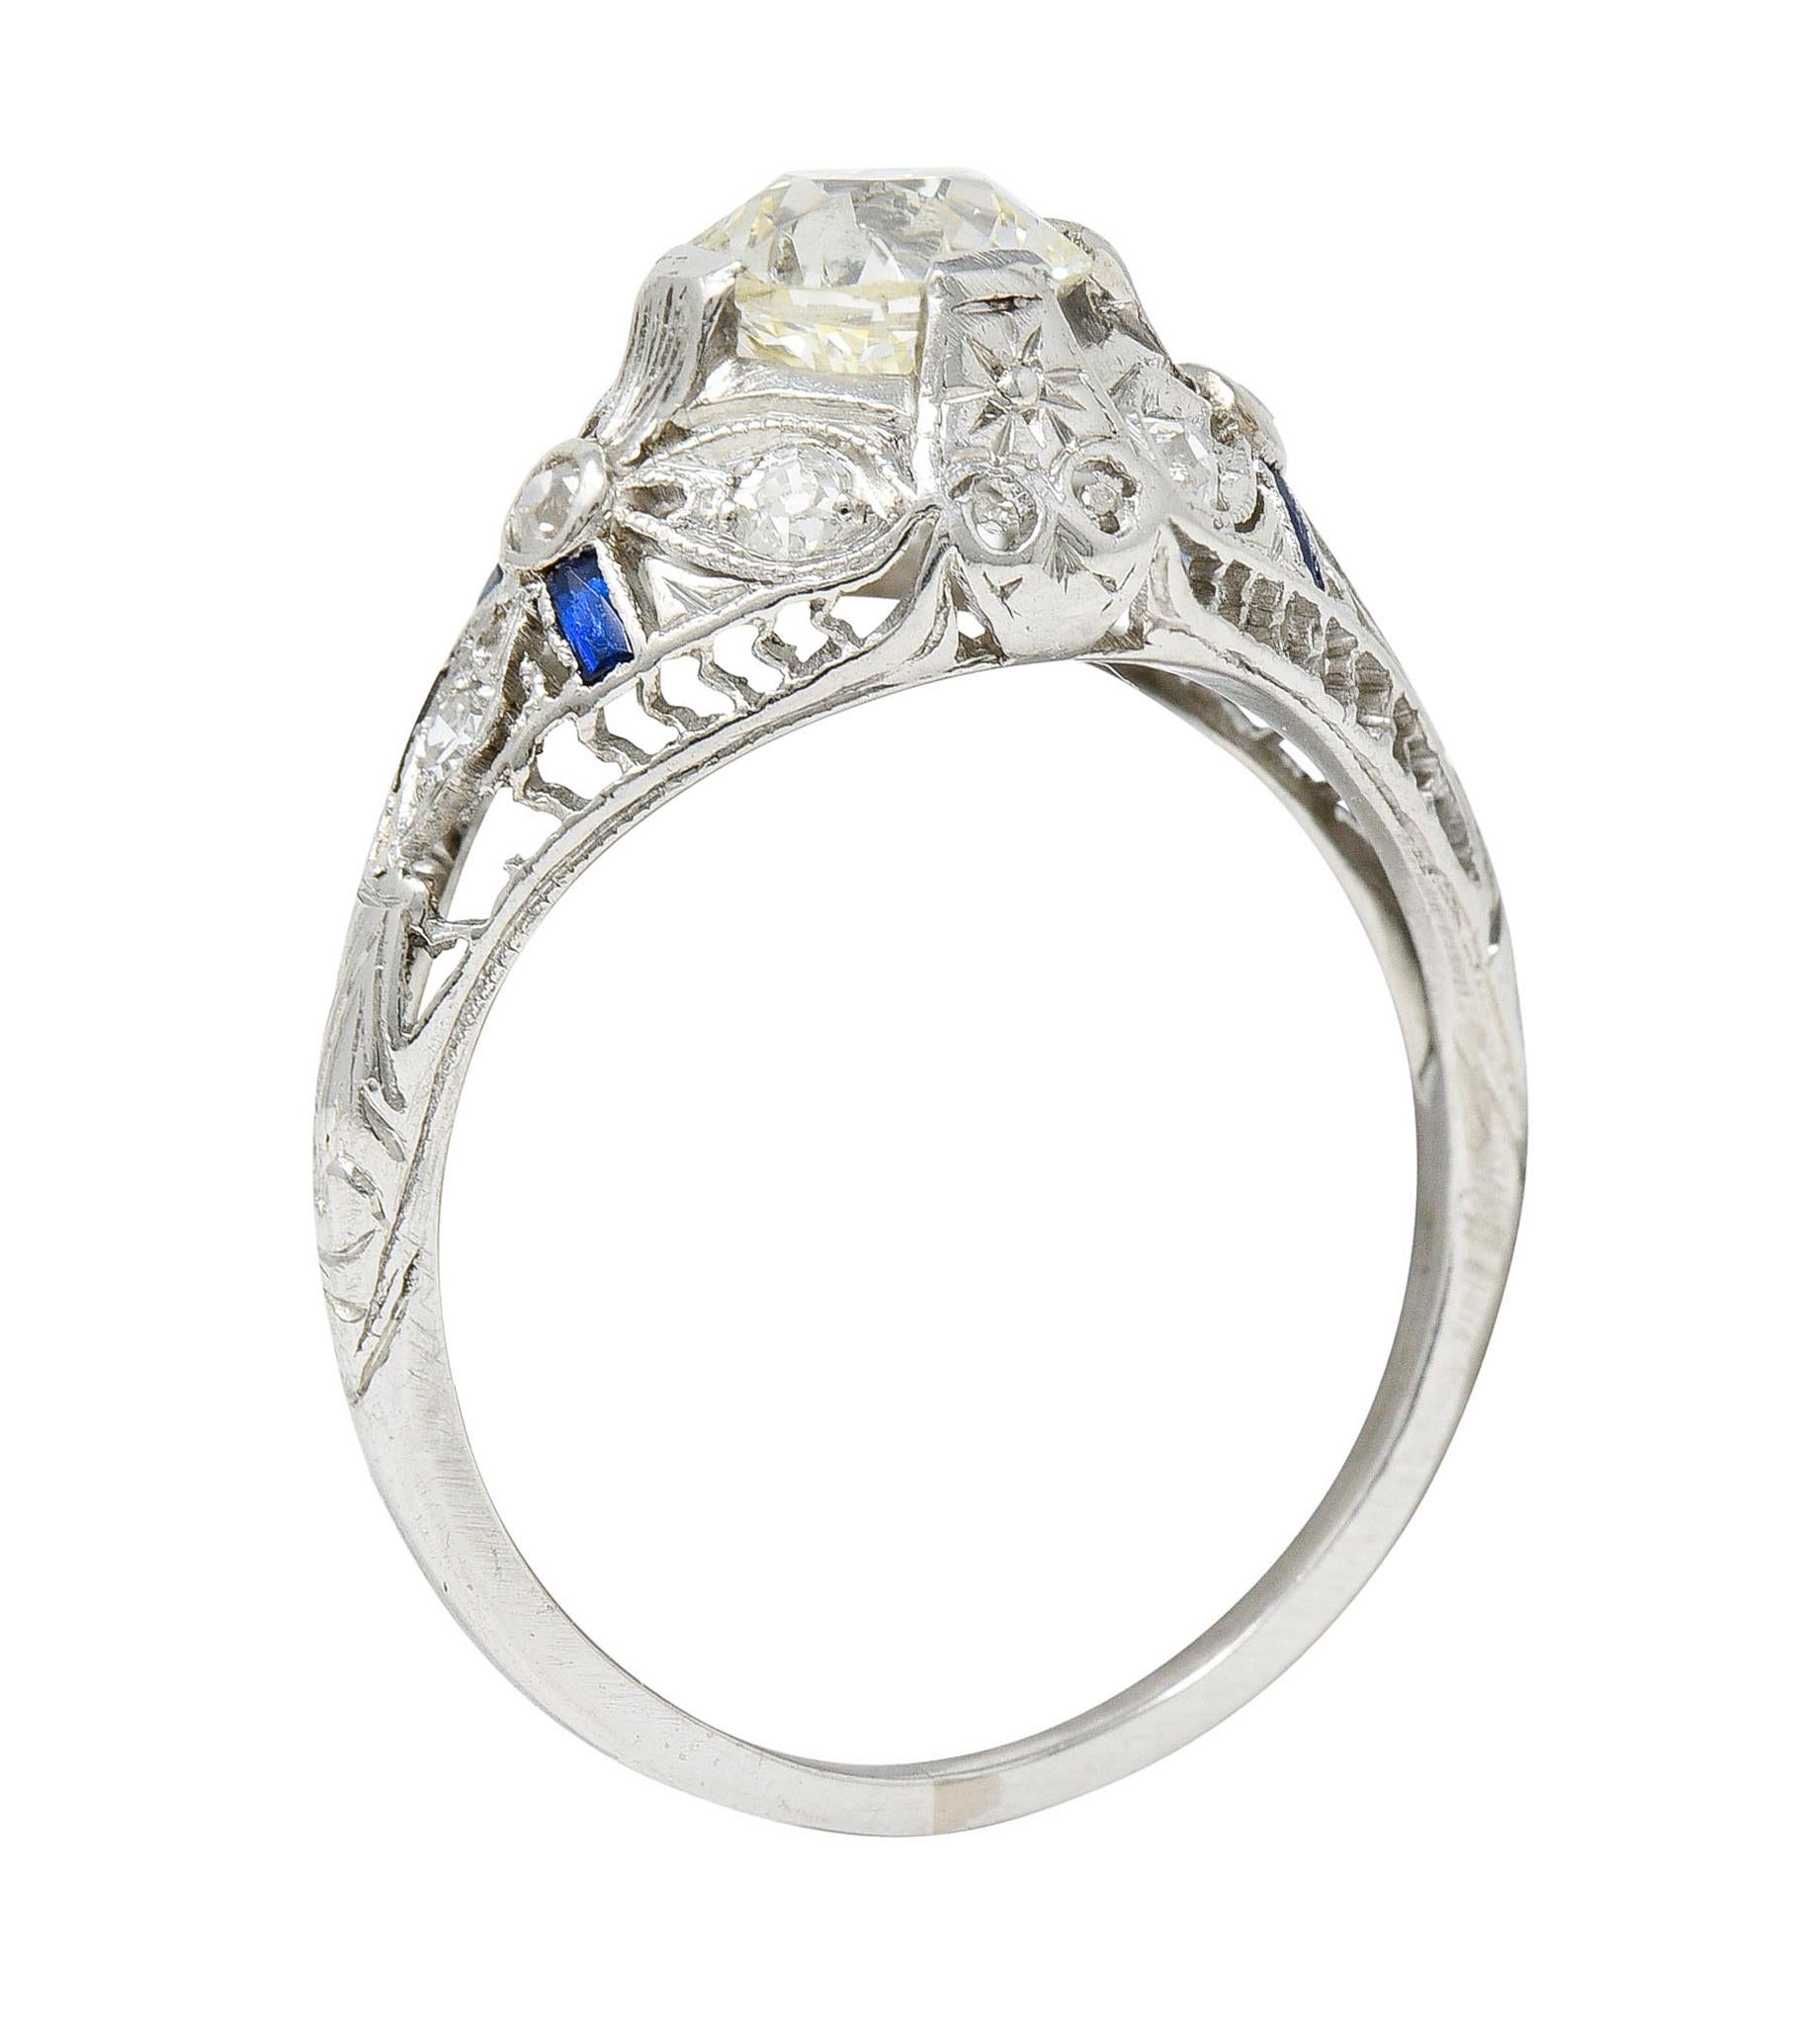 Featuring an old European cut diamond weighing 0.98 carat - M color with VS1 clarity

Set by wide stylized prongs in a bombè style mounting with stylized trefoil shoulders

Accented by calibrè cut synthetic sapphires - well matched in bright blue